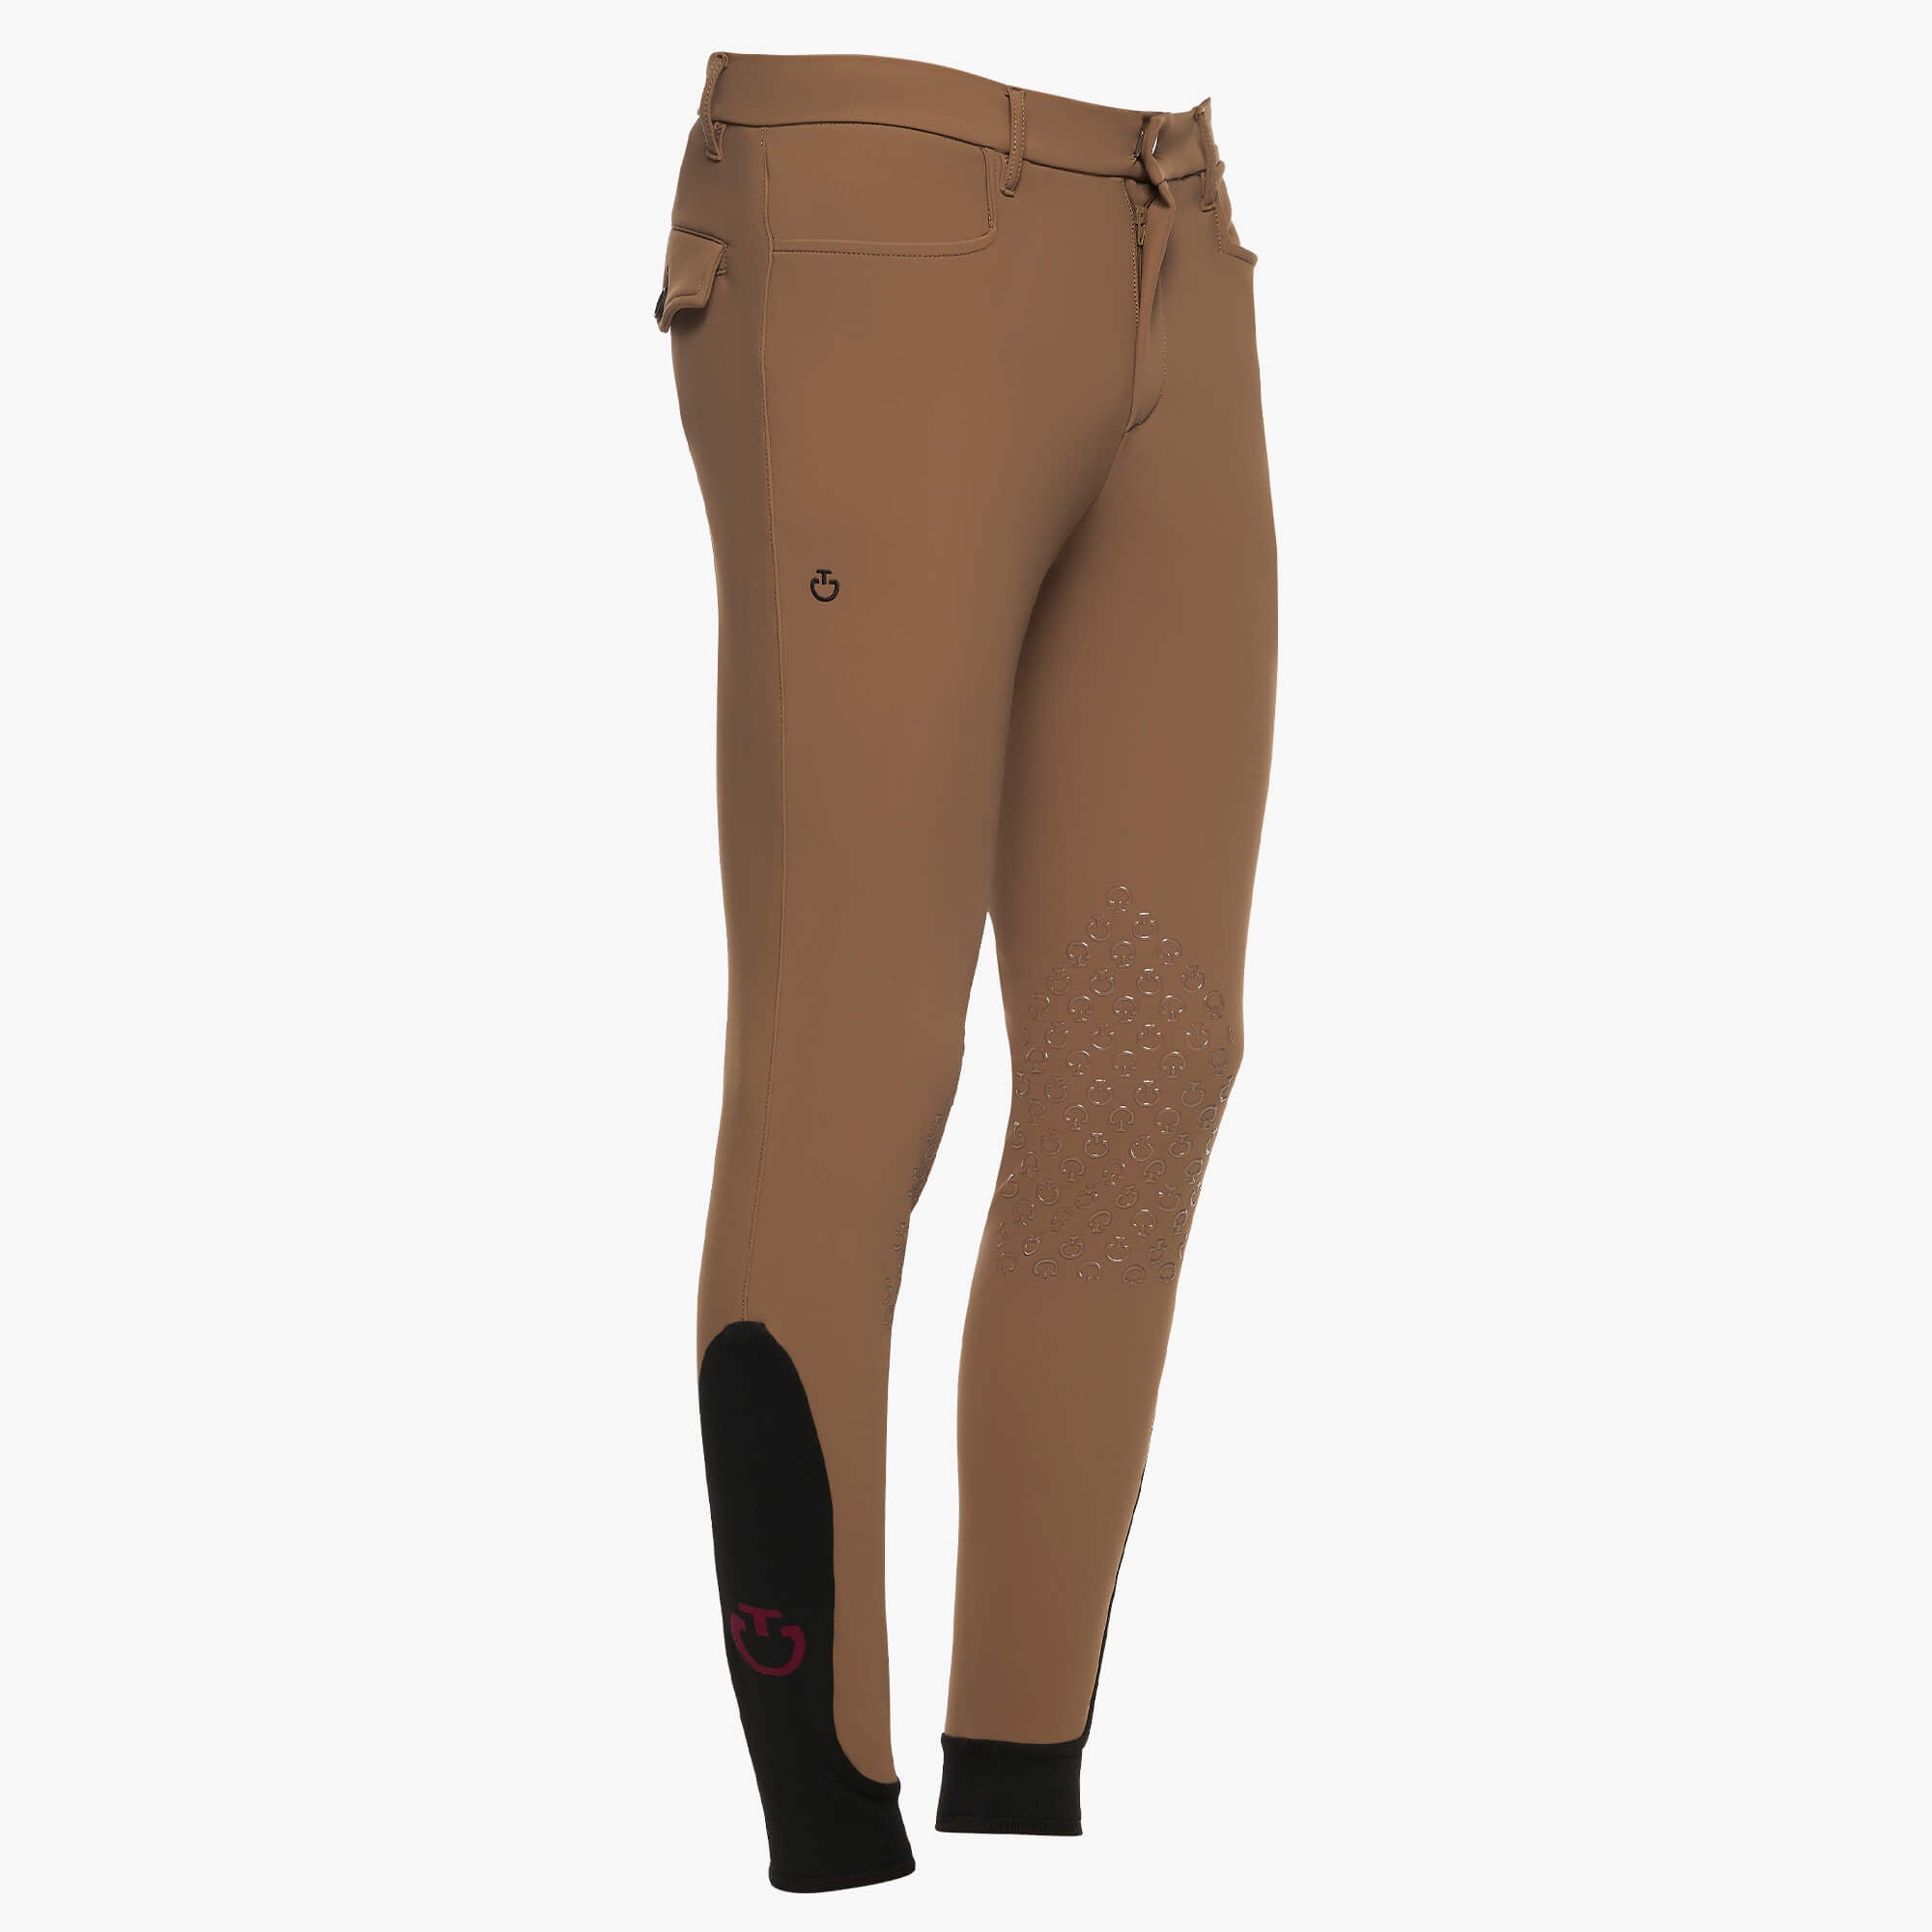 Brown men's breeches with knee grip